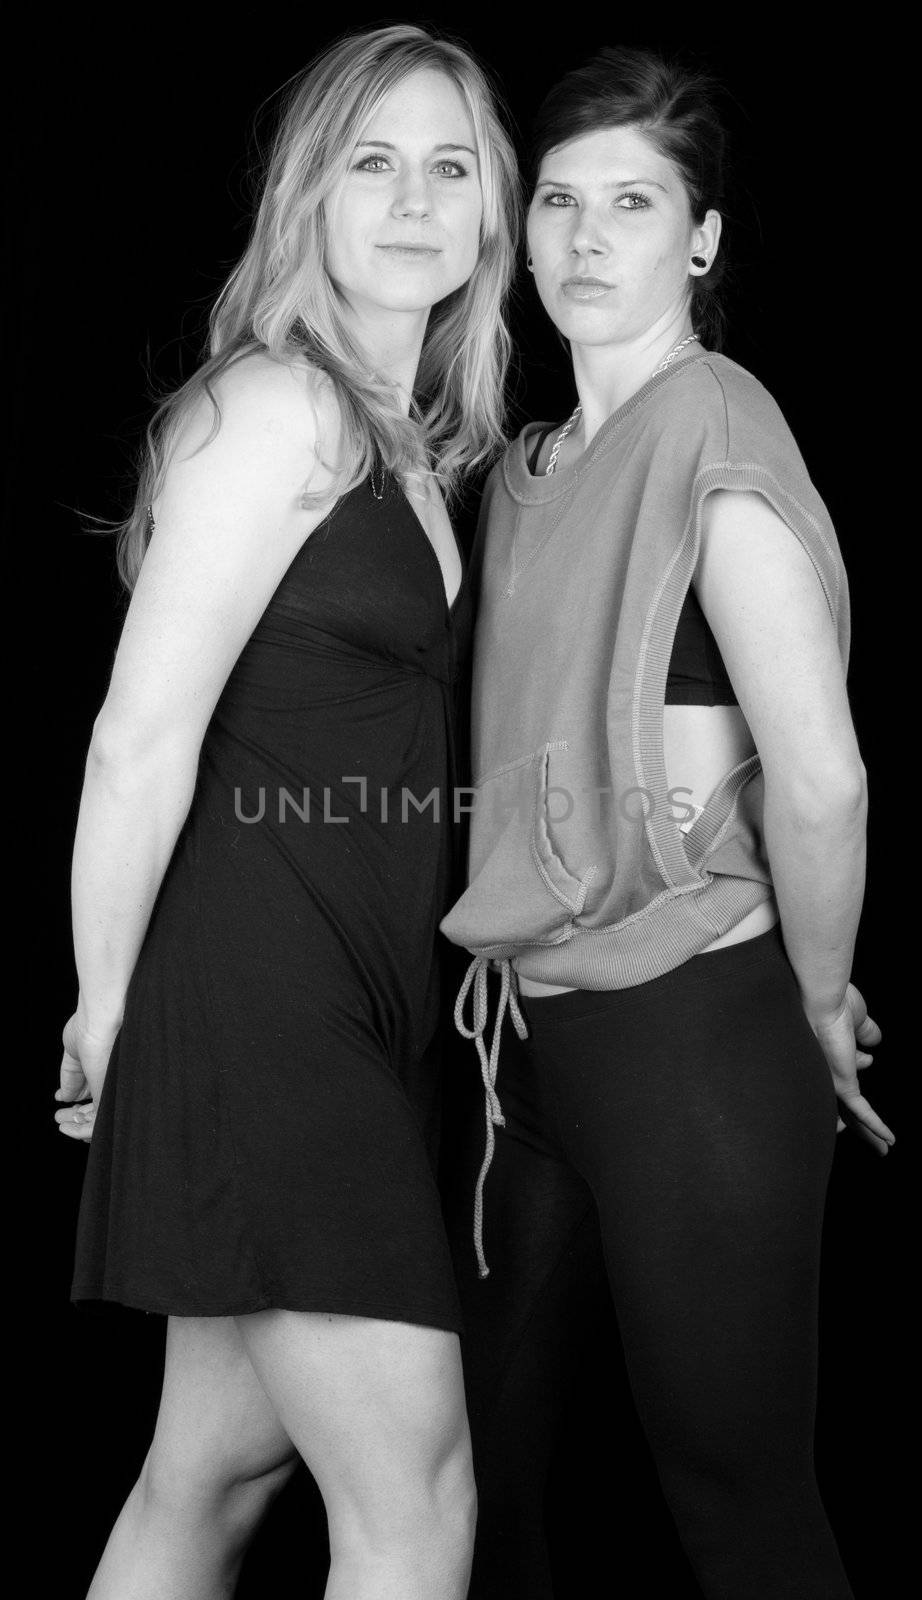 A nice black and white photograph of two attractive women.